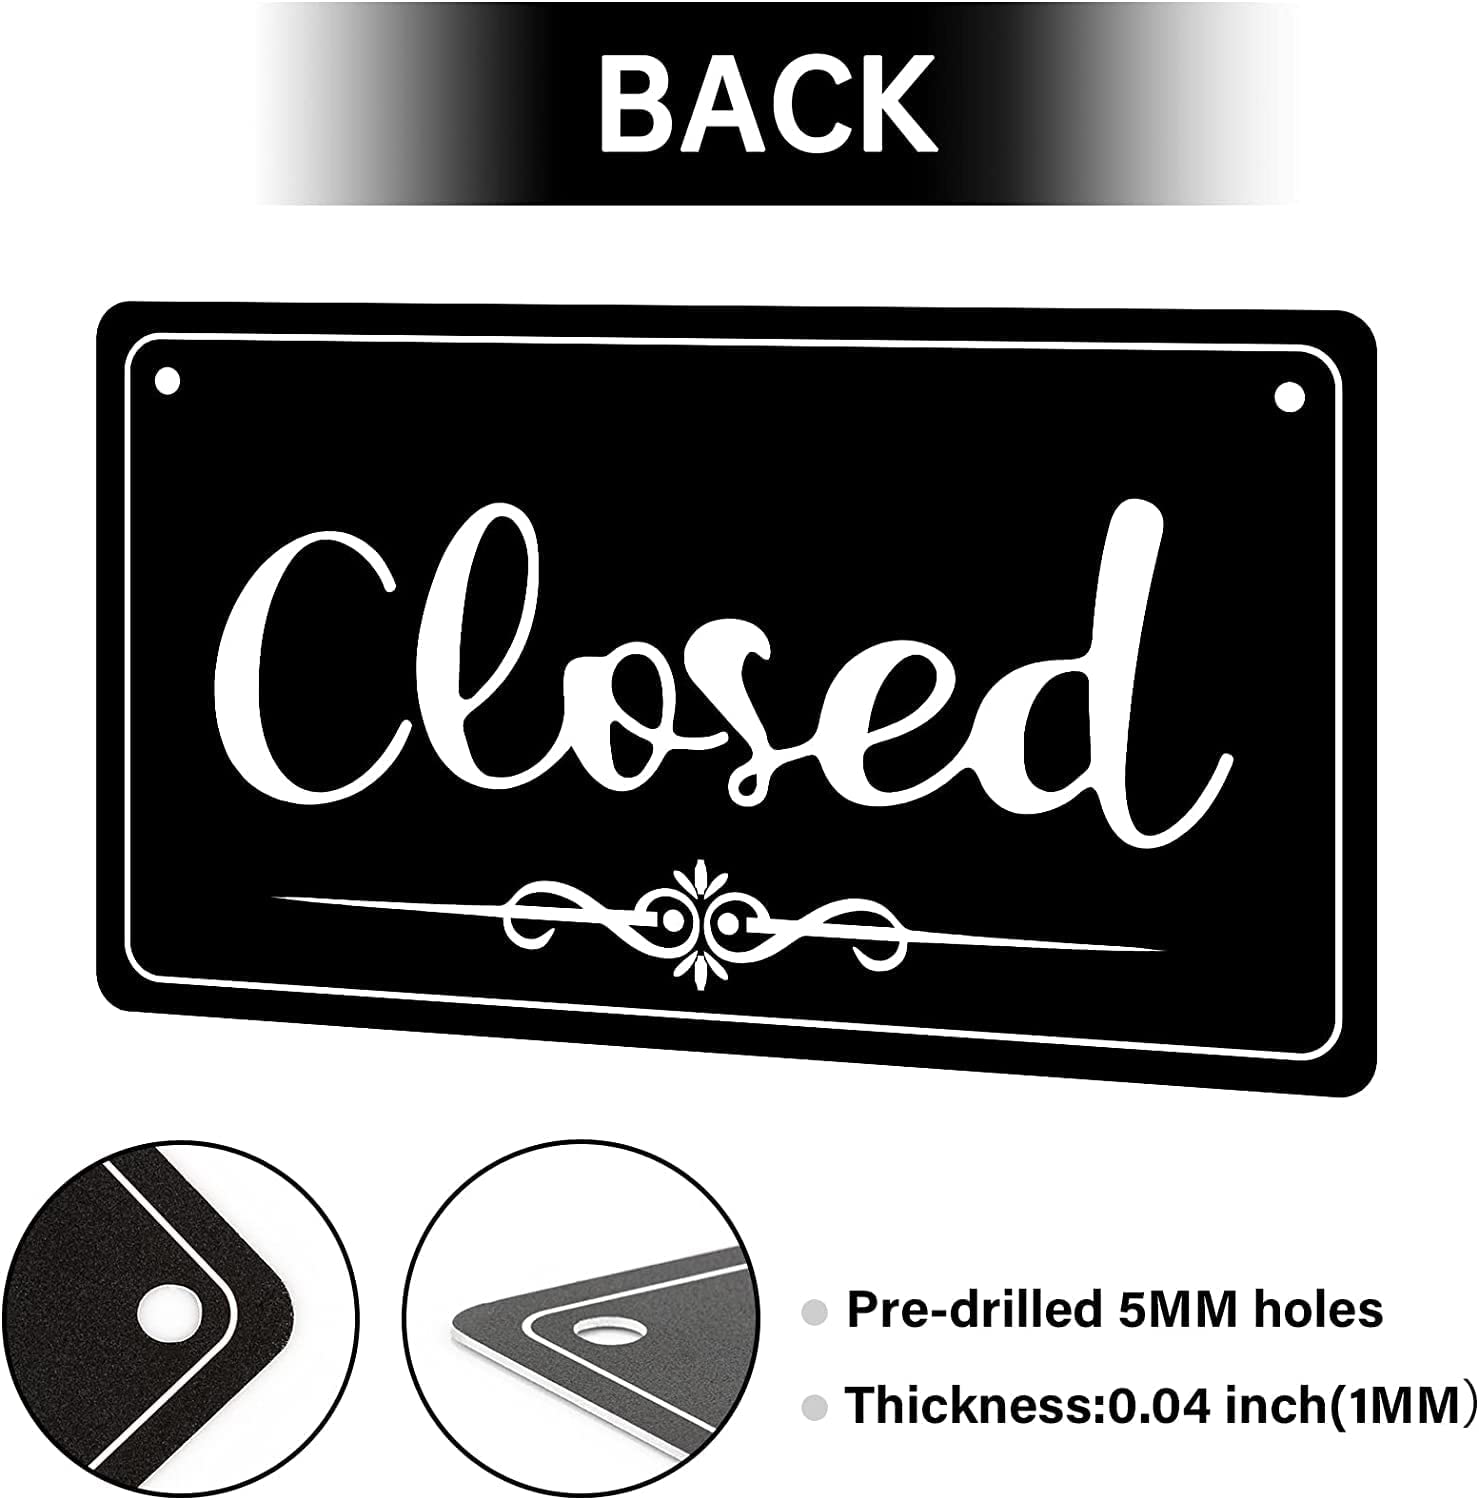 A hanging sign for store entrances, printed on a black background, two sides open and closed, on HDF wood